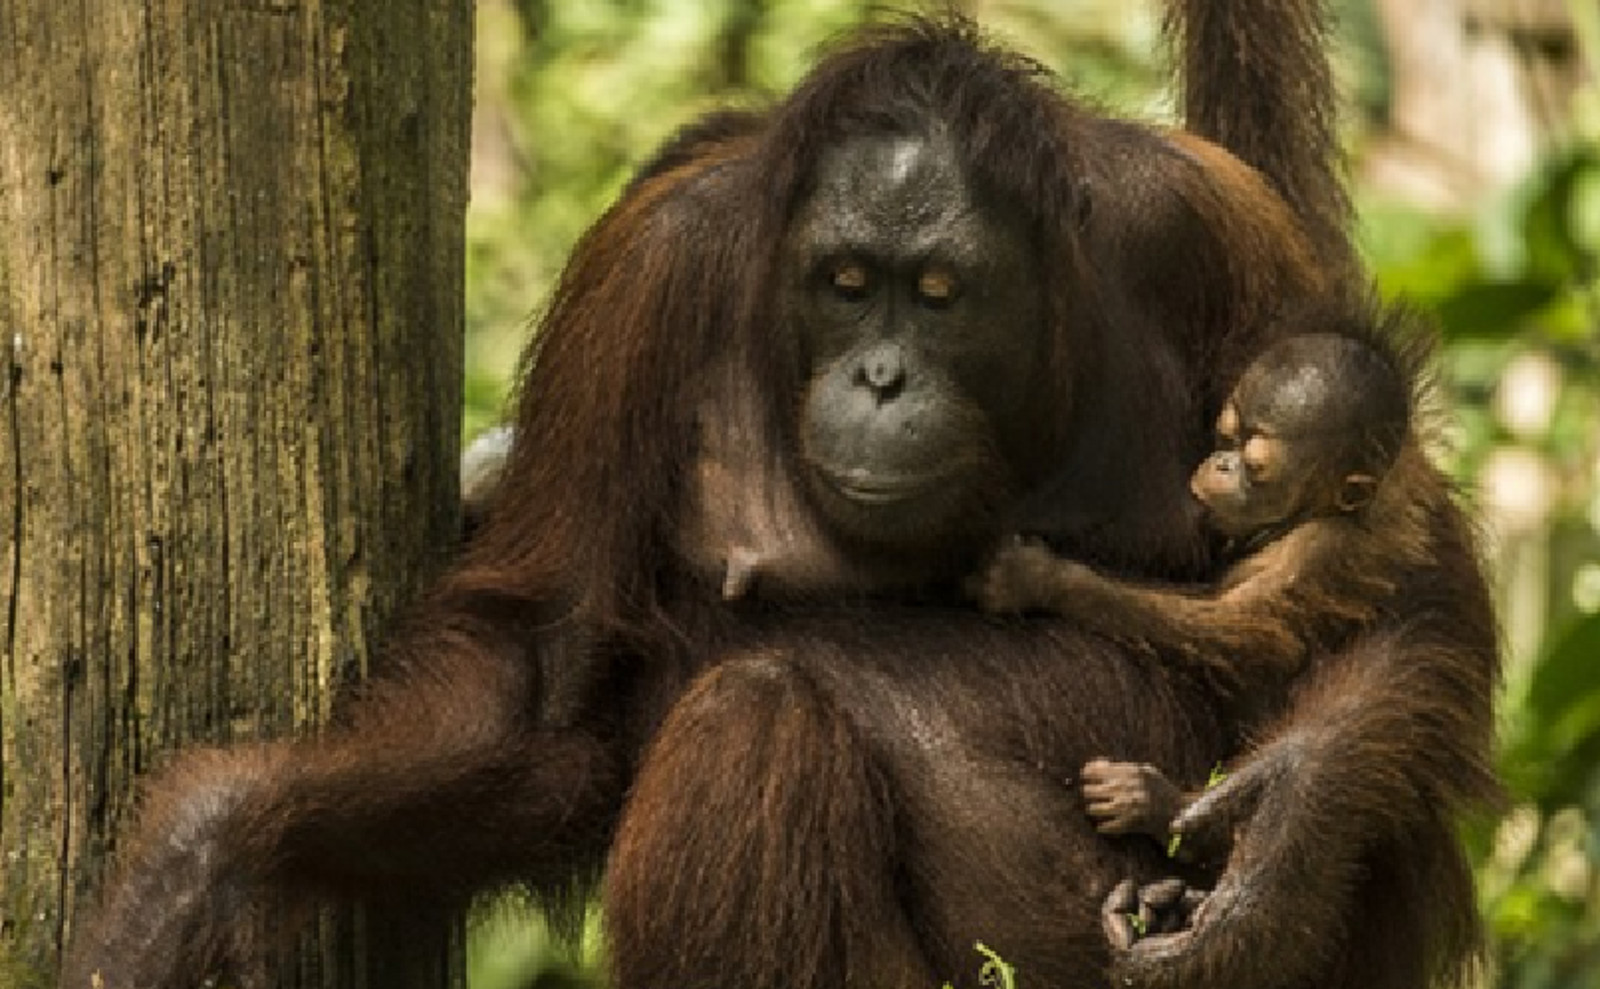 Does This Picture Represent a New Order of Learning for Orangutans?